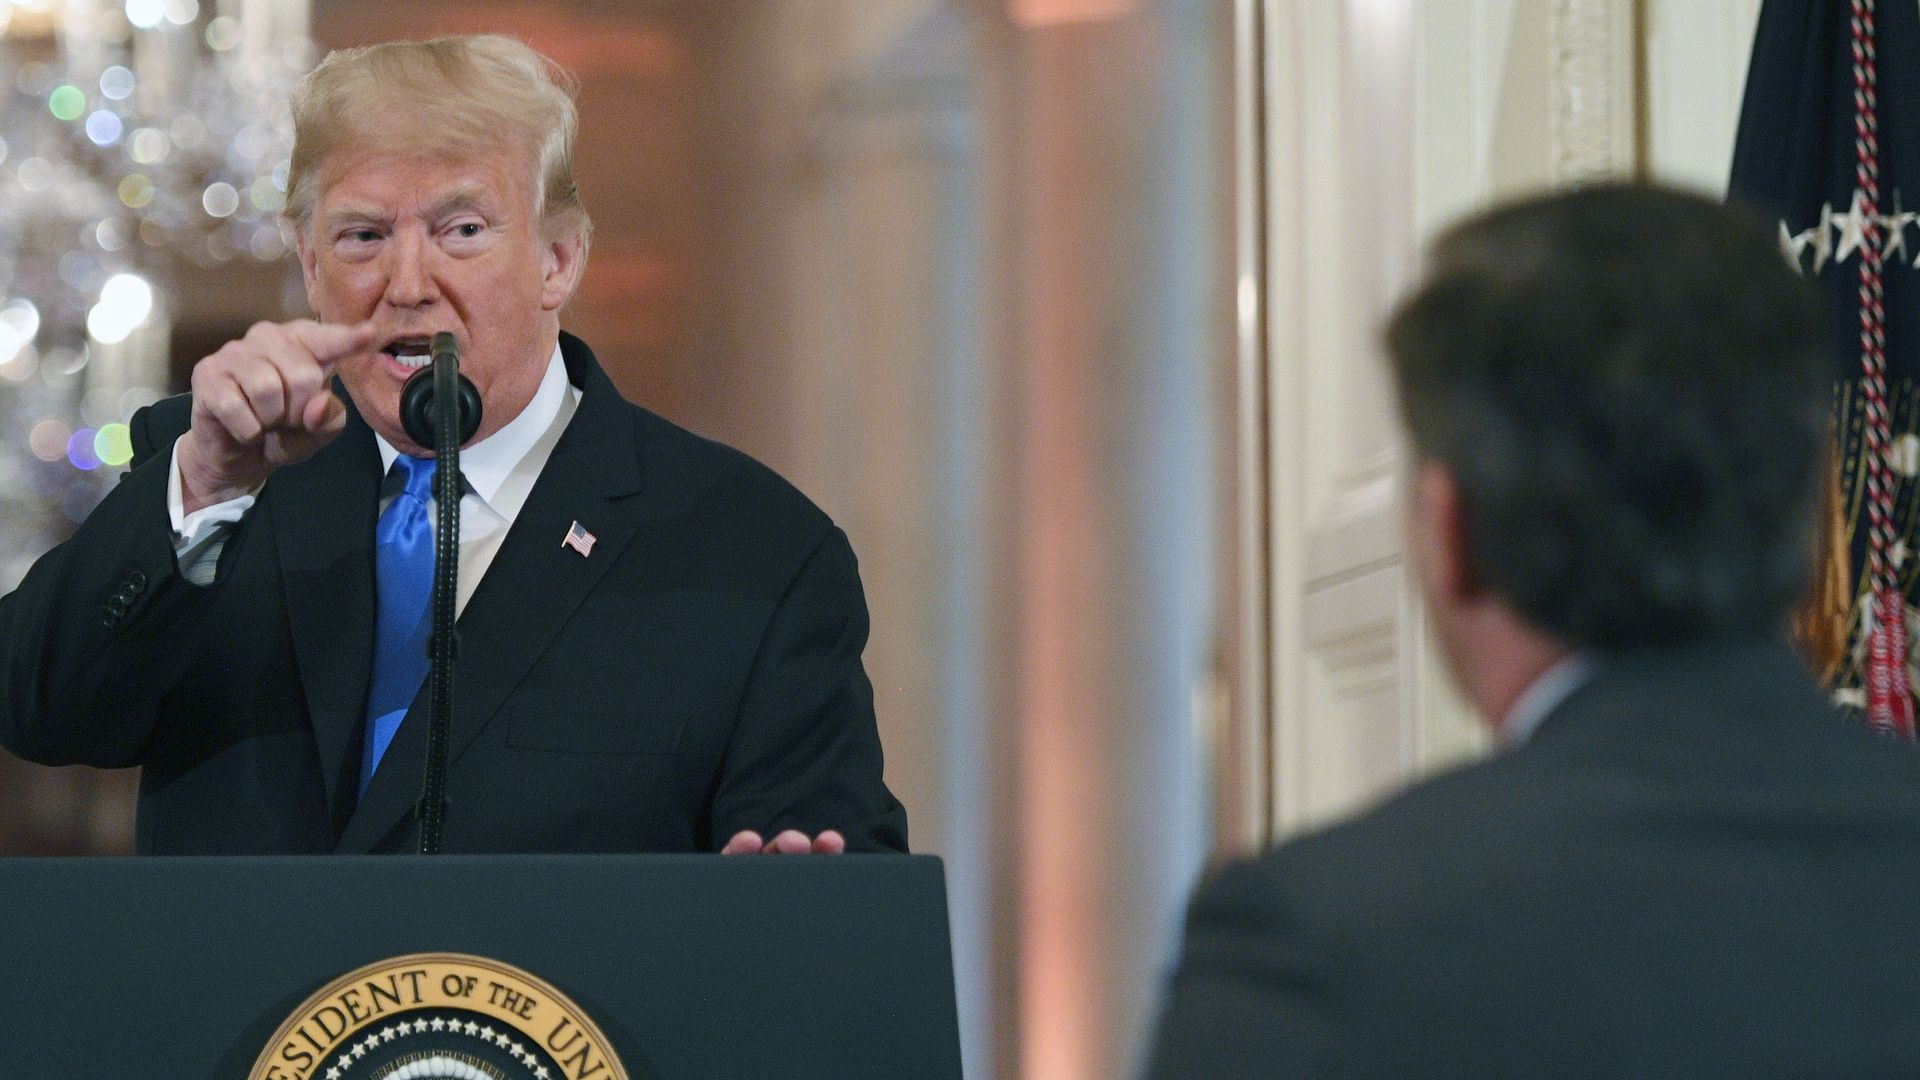 President Donald Trump points to journalist Jim Acosta from CNN during a post-election press conference